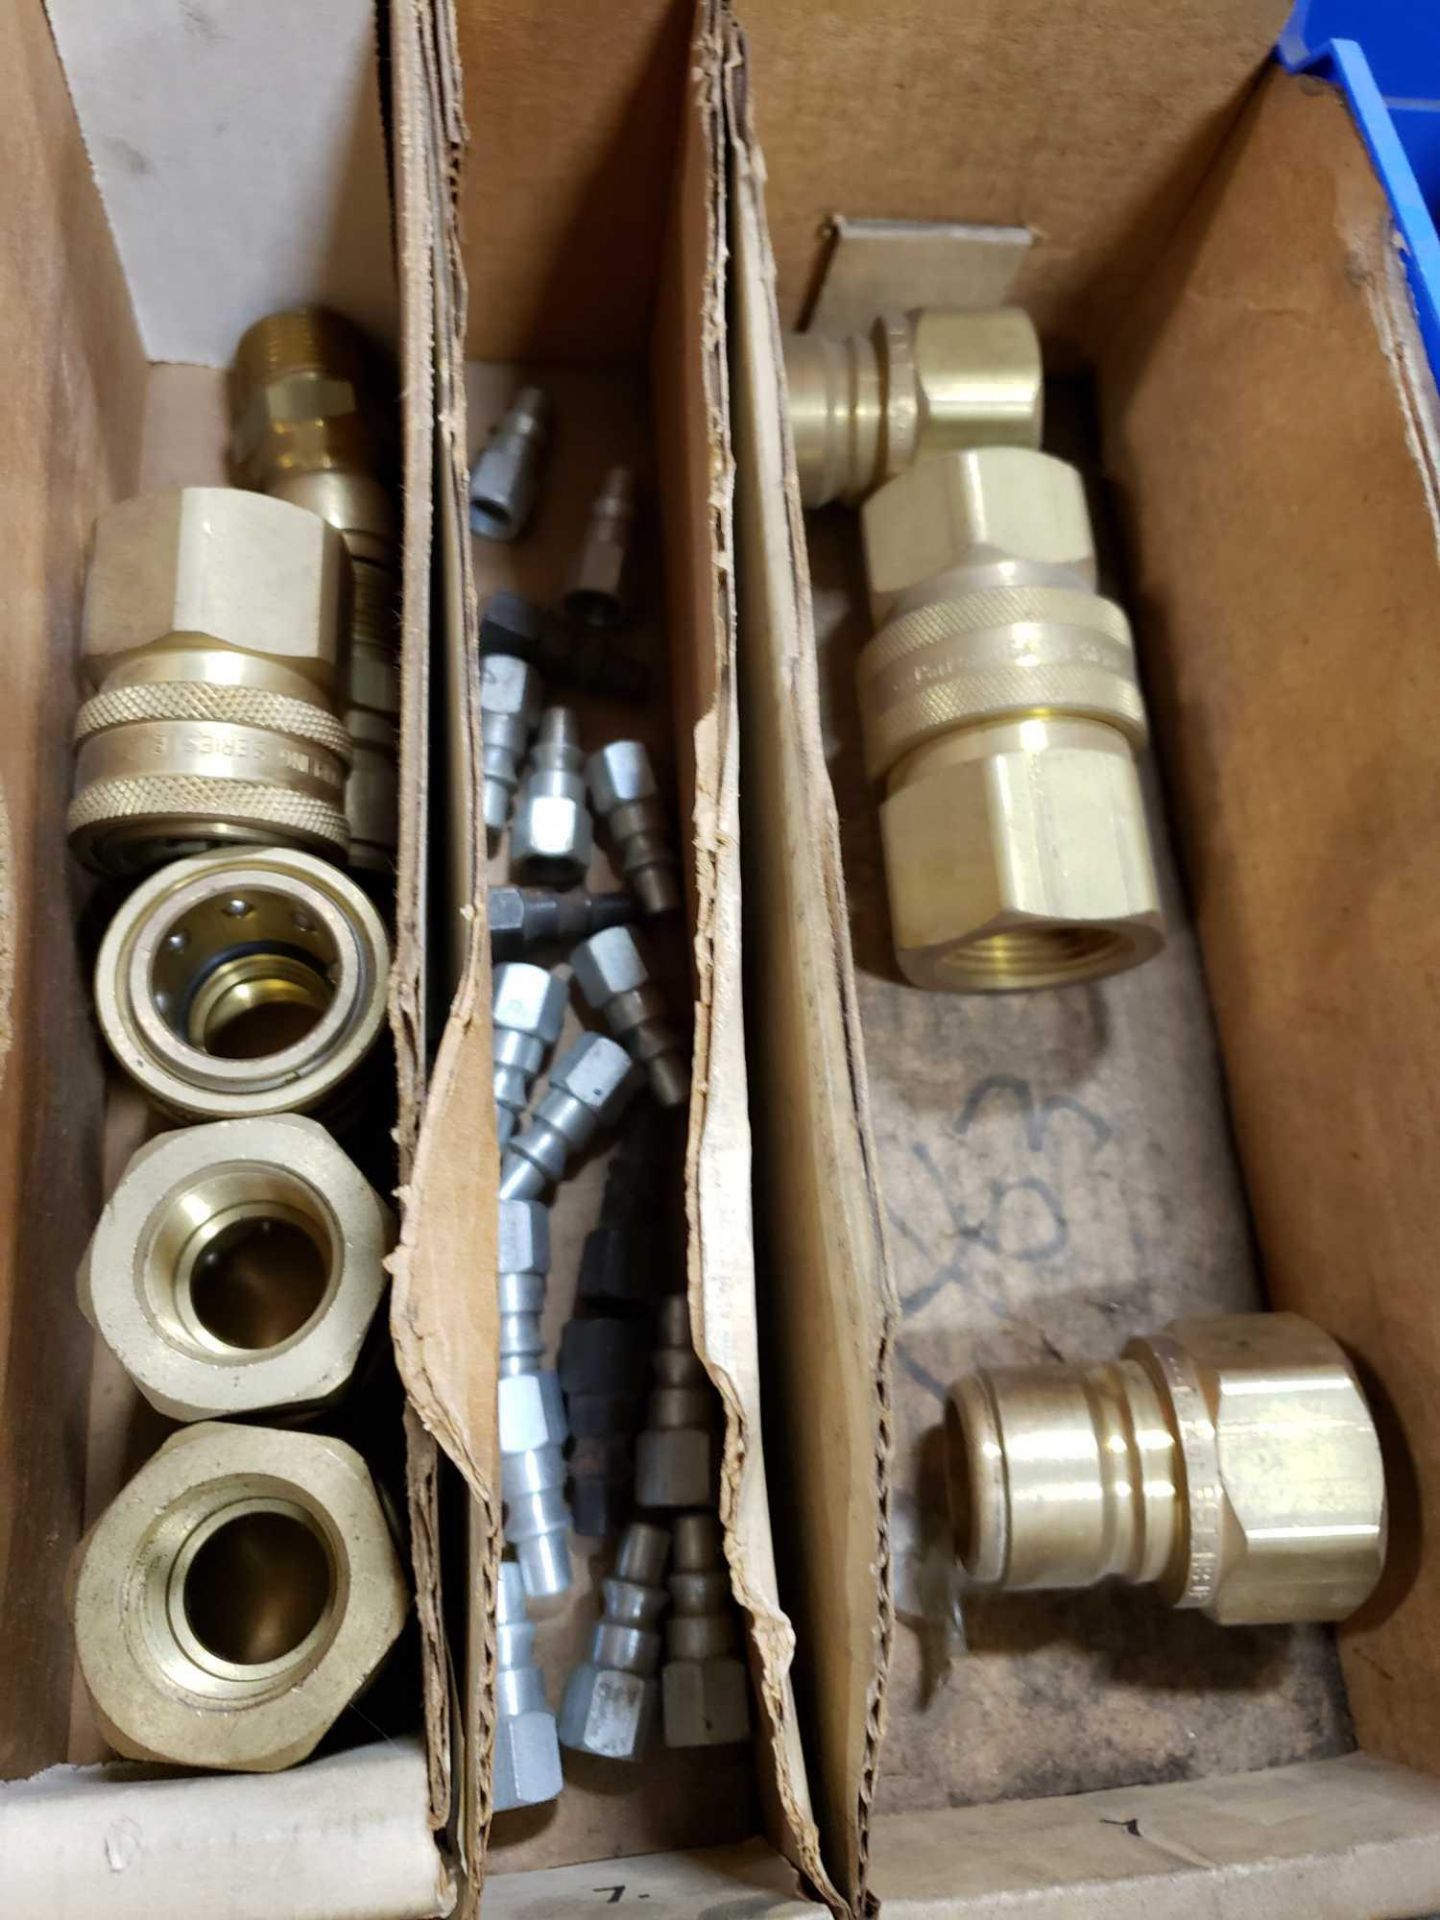 Lot of assorted hydraulic and pneumatic fittings. New as pictured. - Image 3 of 4